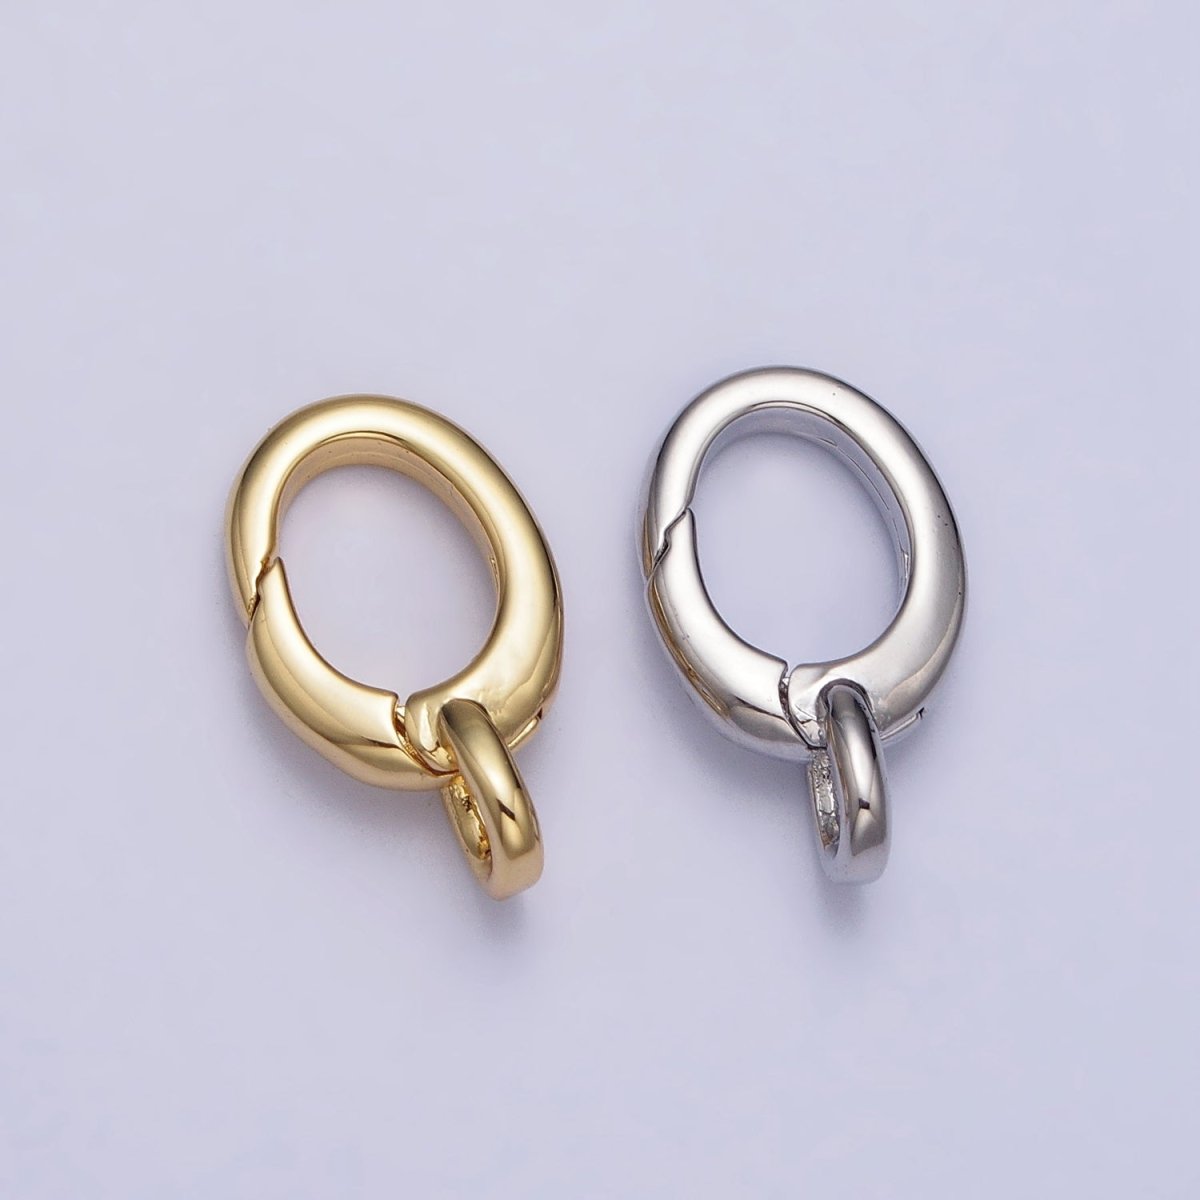 24K Gold Filled Oval Push Triggerless Clasps Jewelry Closure Supply in Gold & Silver | Z-123 Z-124 - DLUXCA